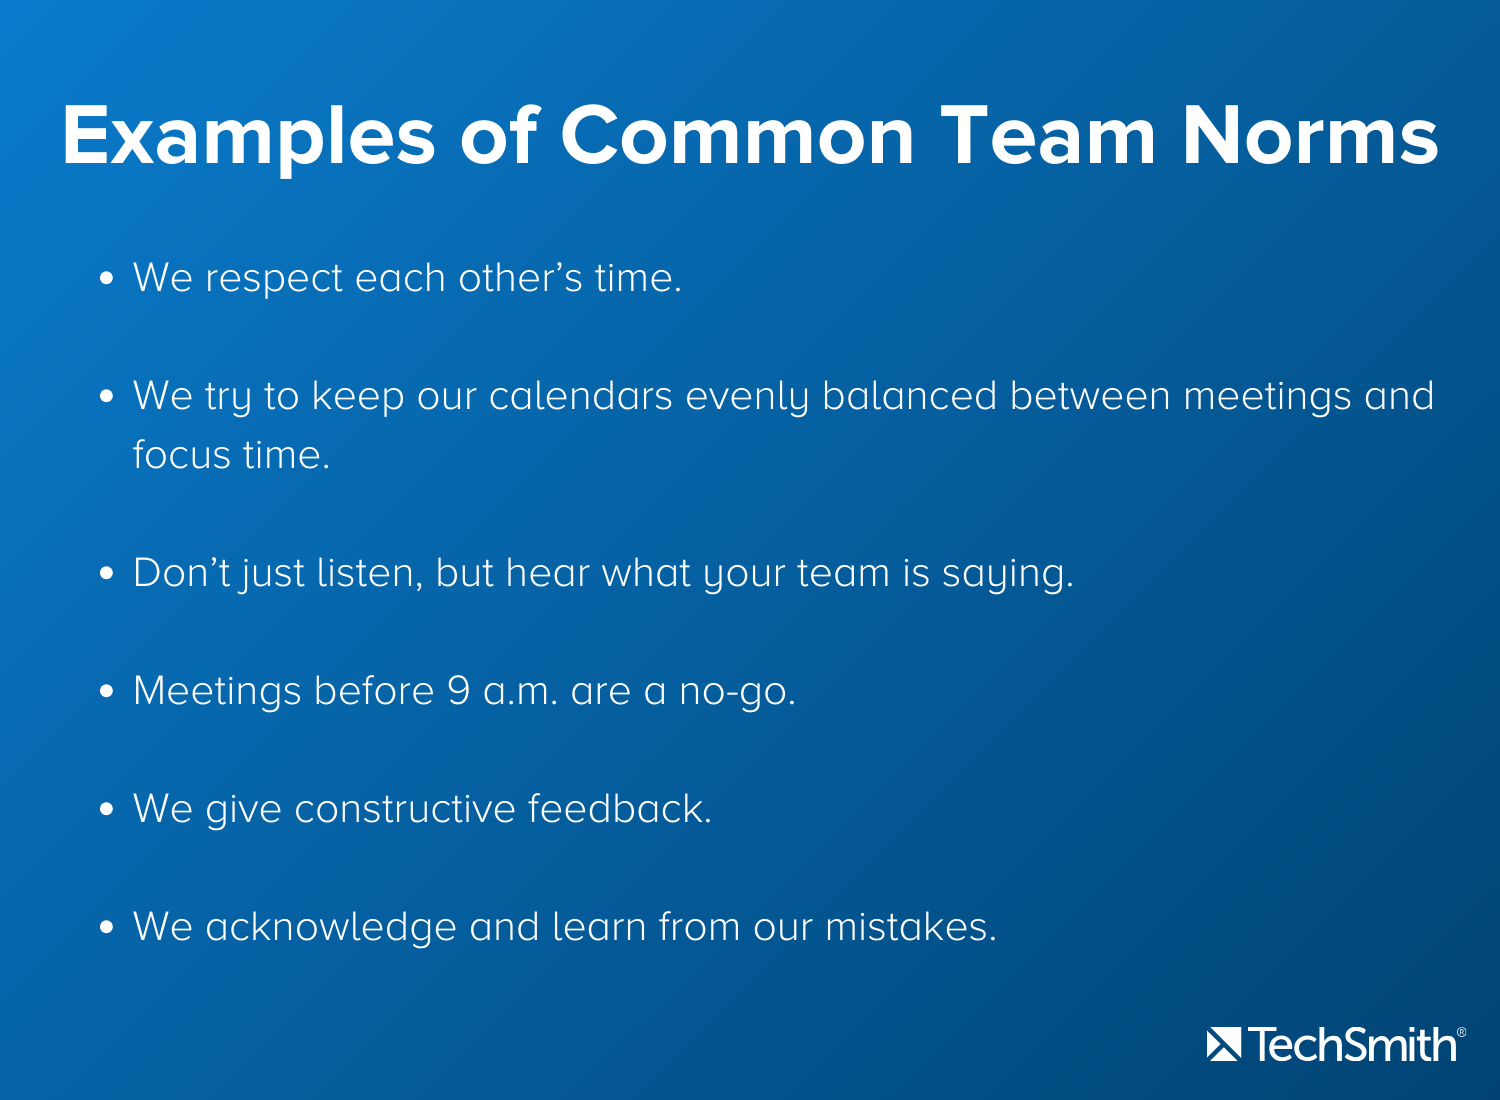 A list of common team norms found at TechSmith.